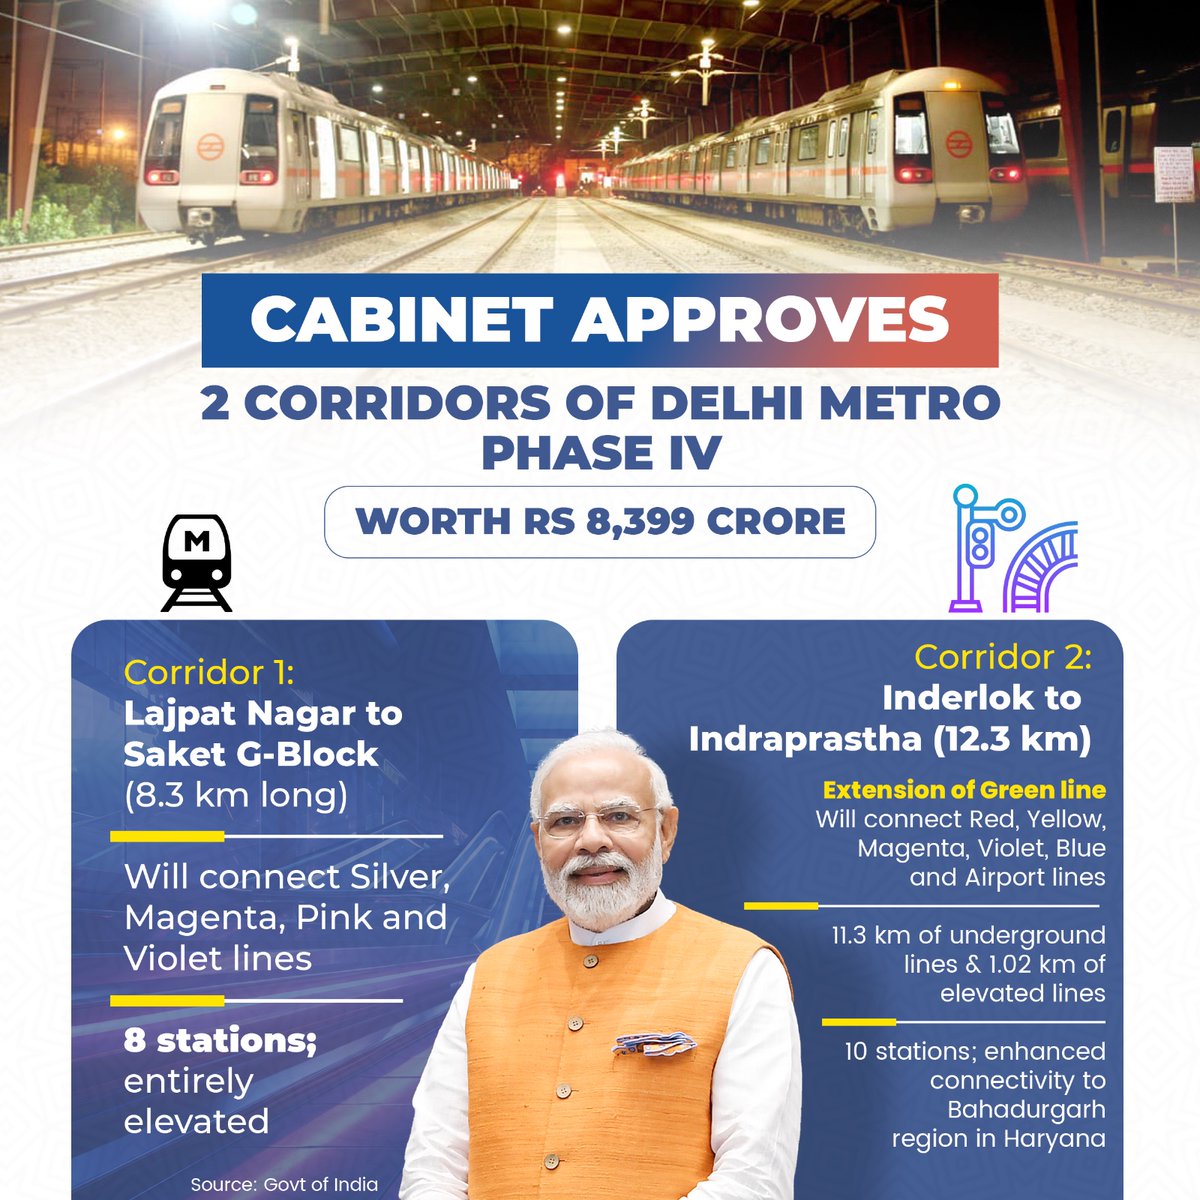 Two new corridors of Delhi Metro's Phase-IV have been approved by the Union Cabinet to further improve Metro connectivity in the national capital.

#CabinetDecisions